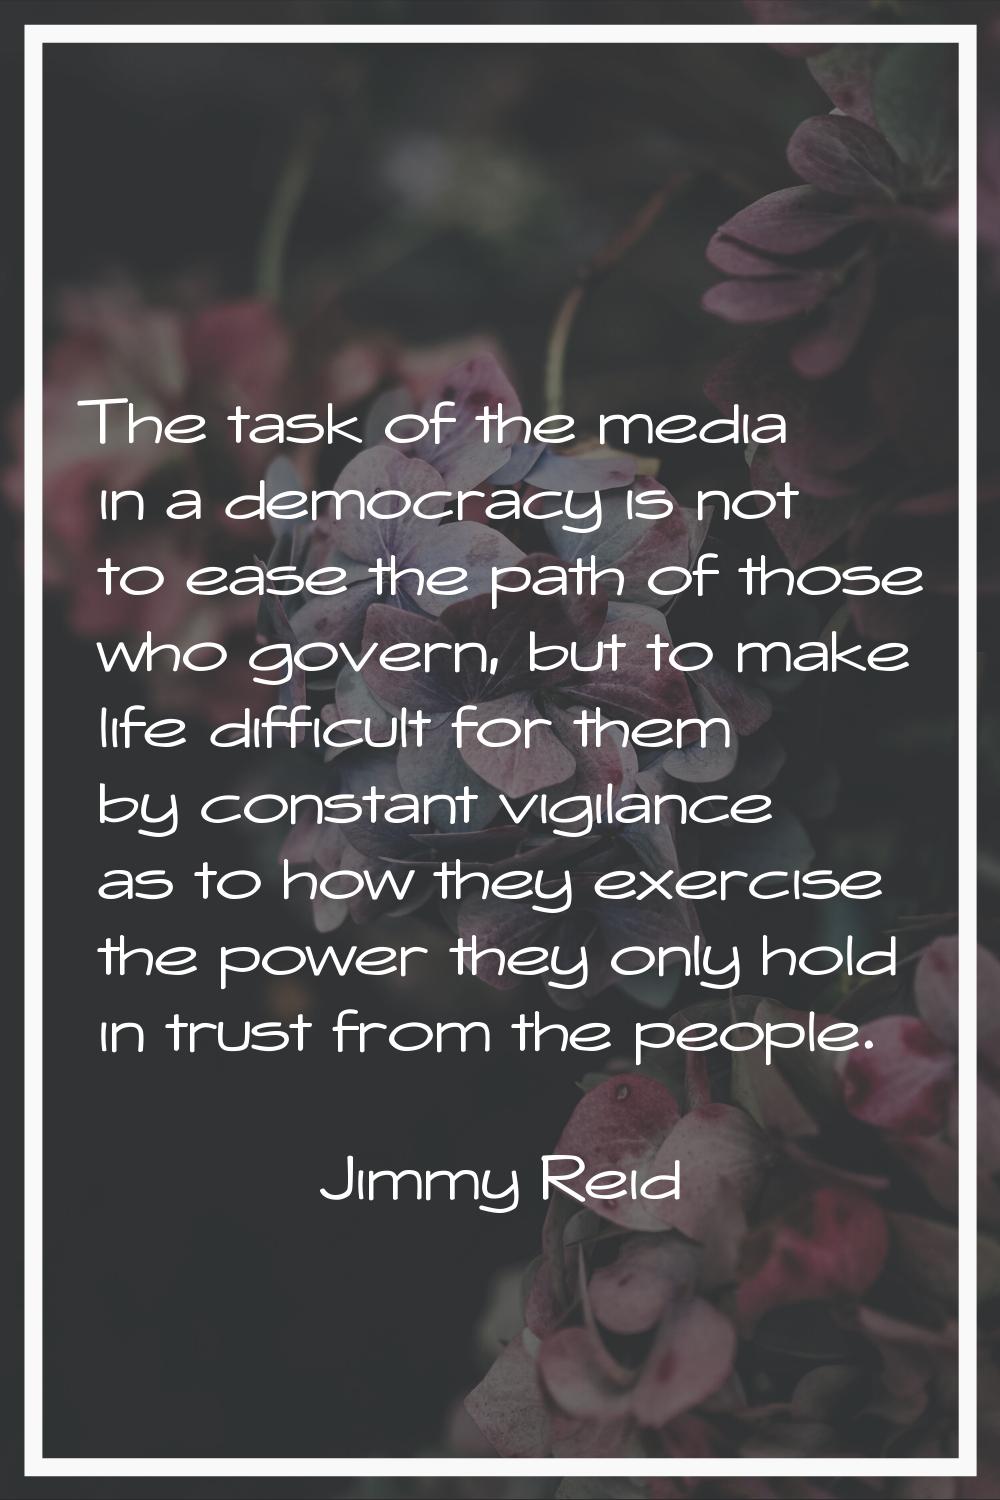 The task of the media in a democracy is not to ease the path of those who govern, but to make life 